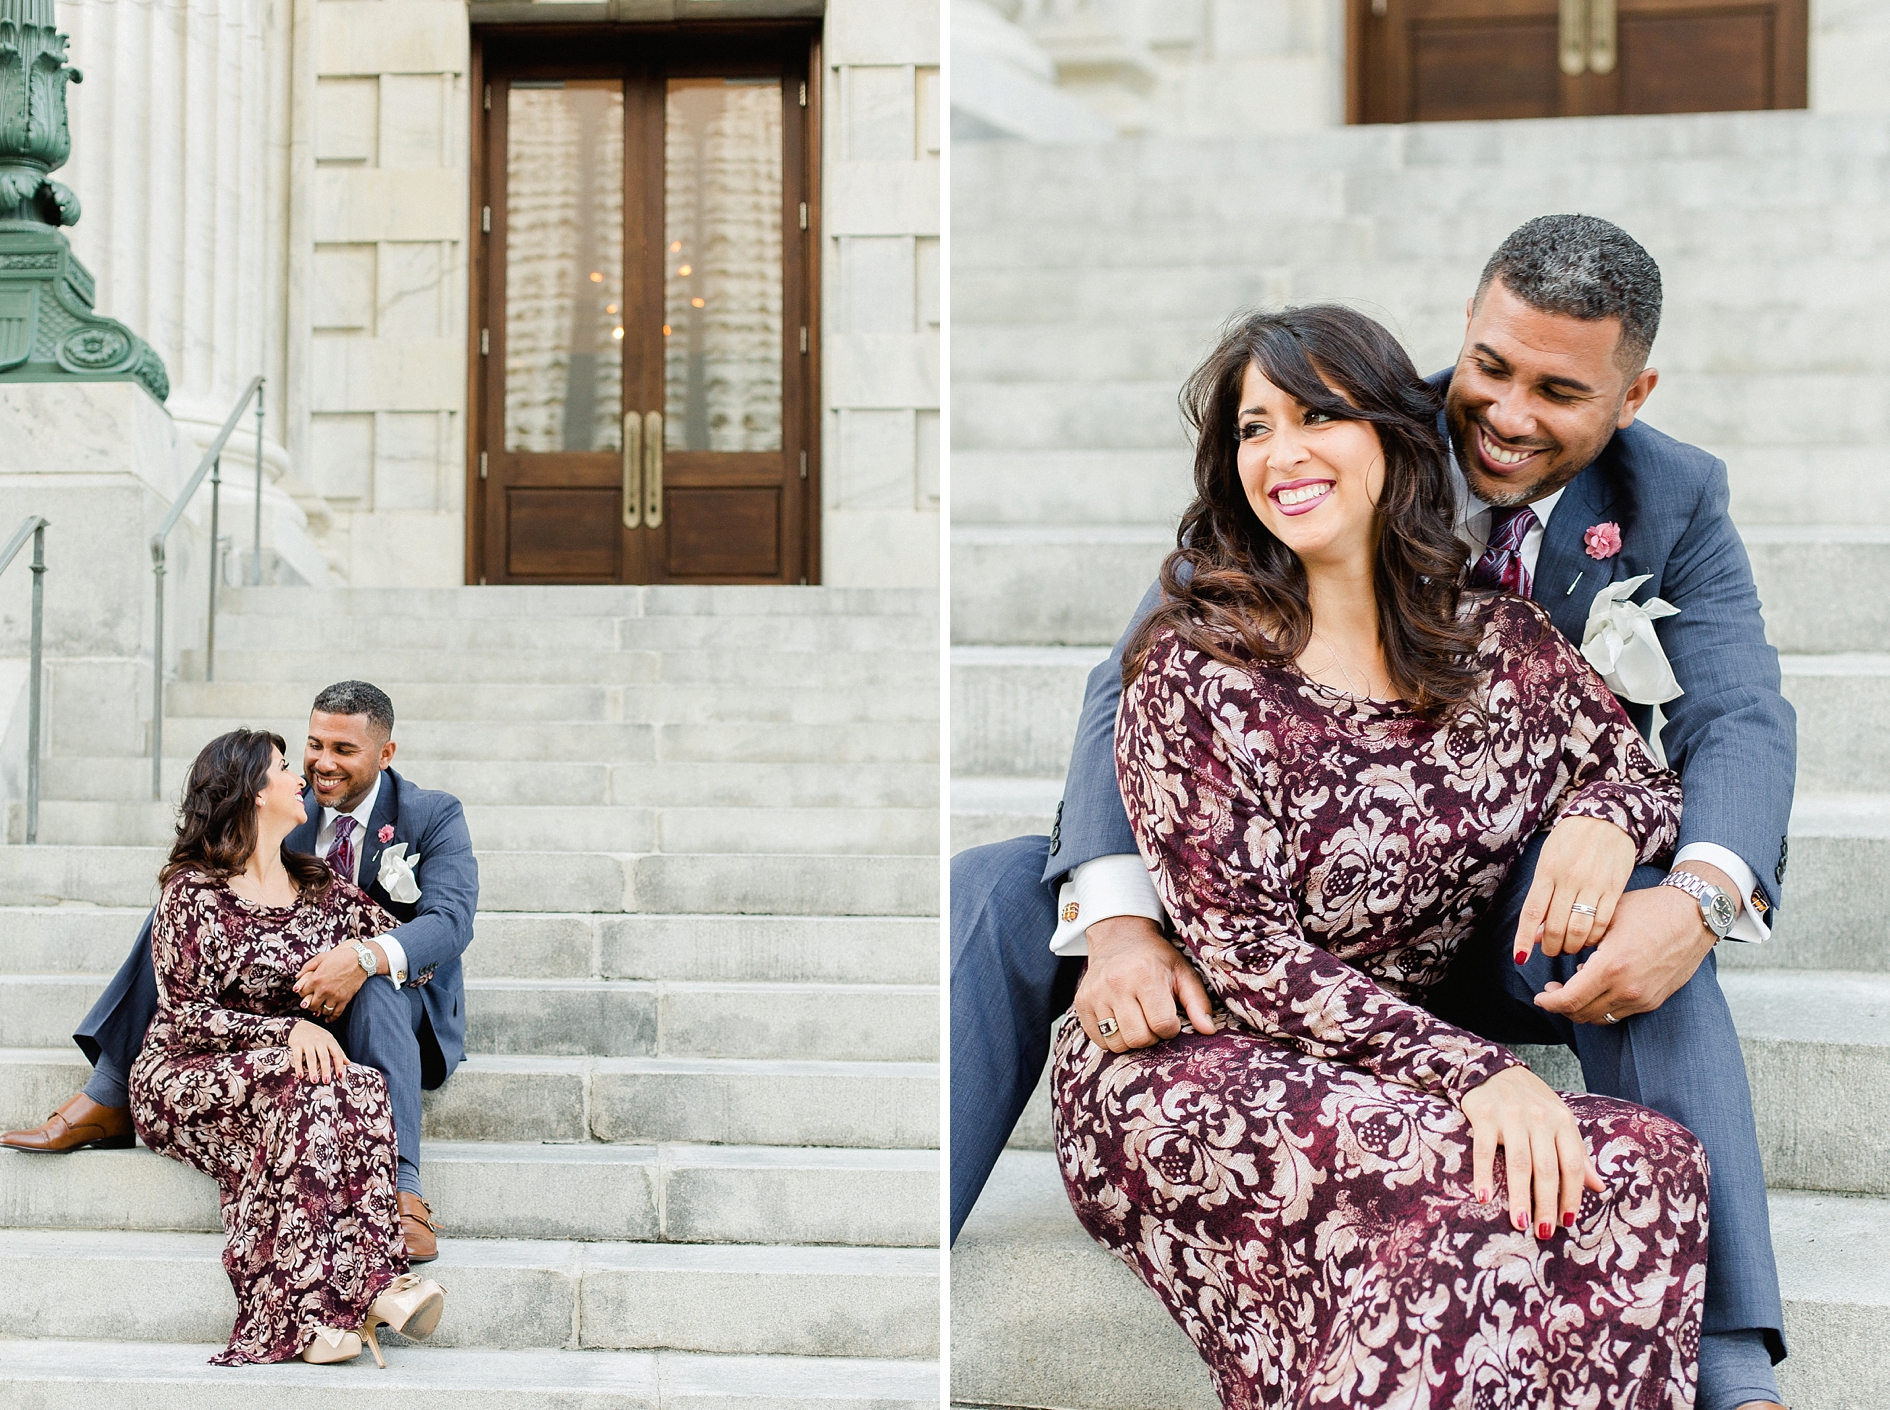 Tampa Mini Session | © Ailyn La Torre Photography 2015